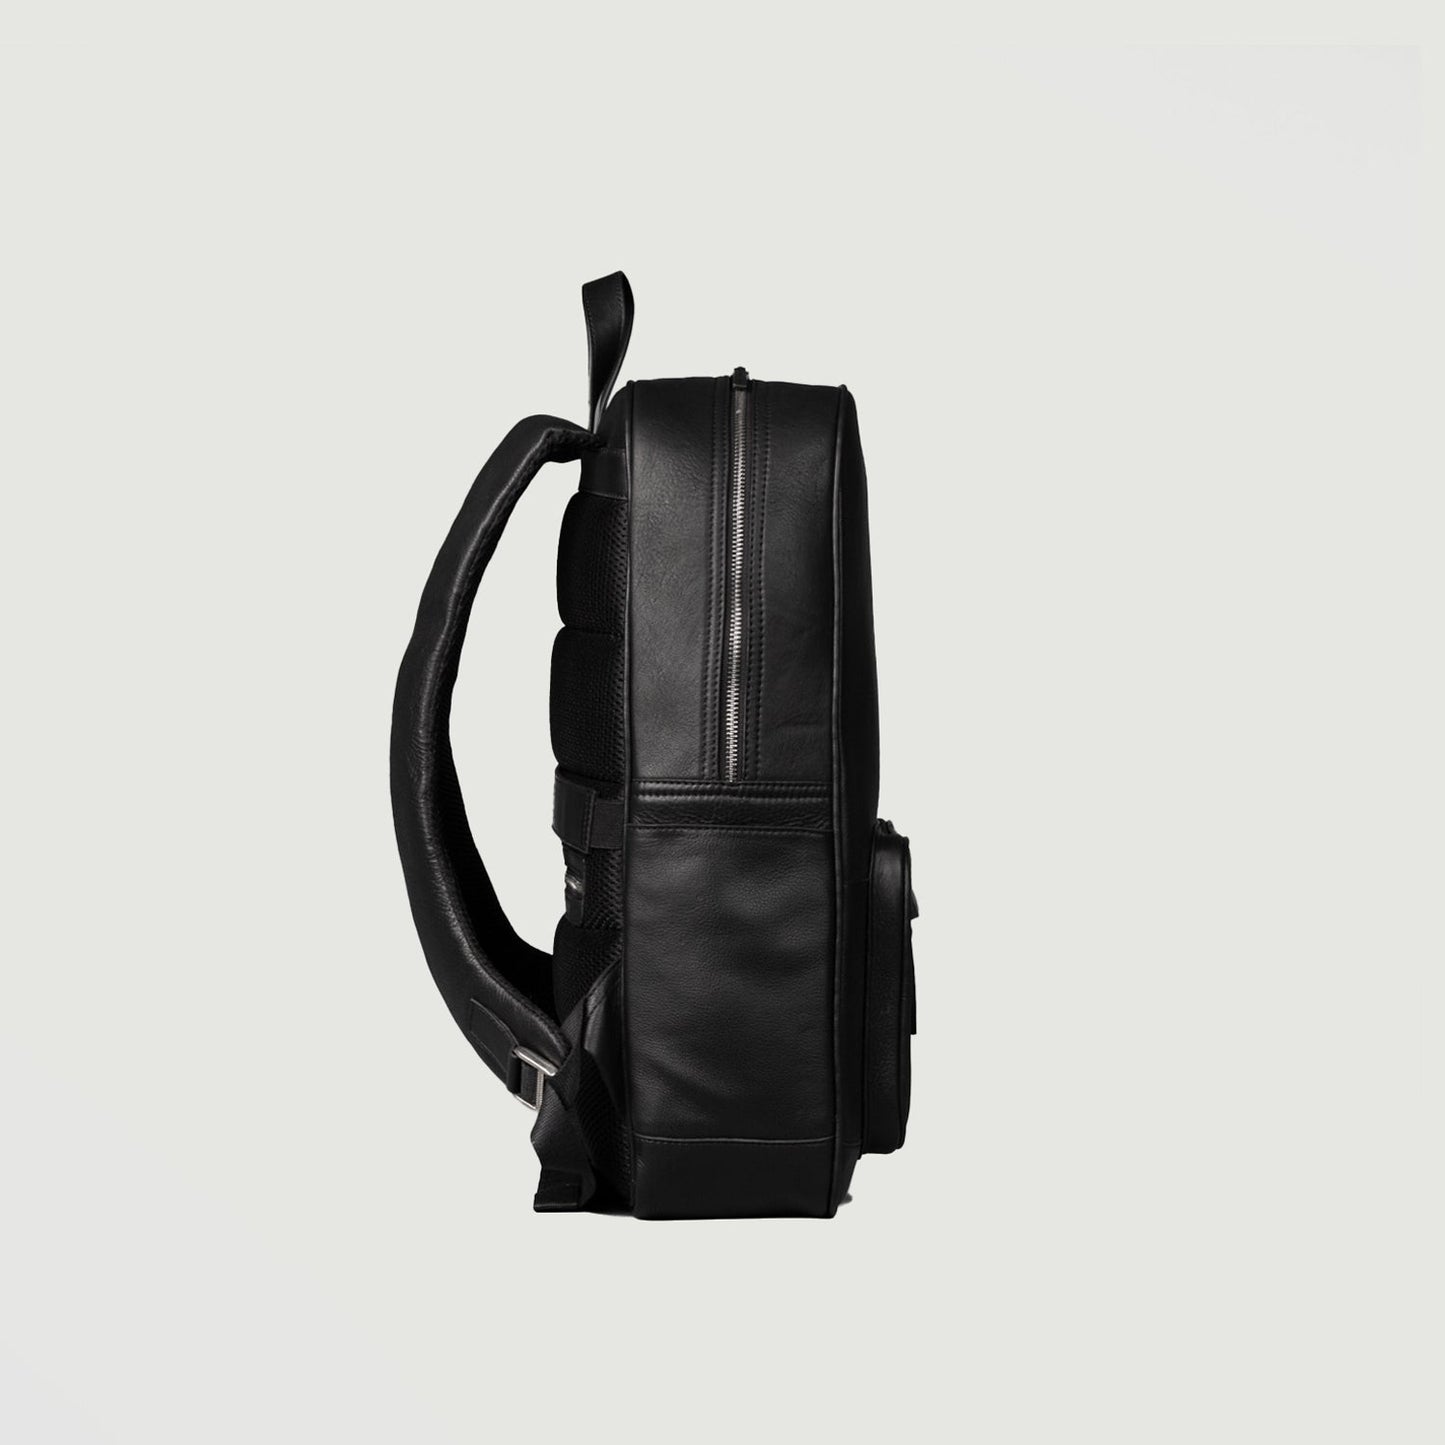 The Philos Black Leather Backpack